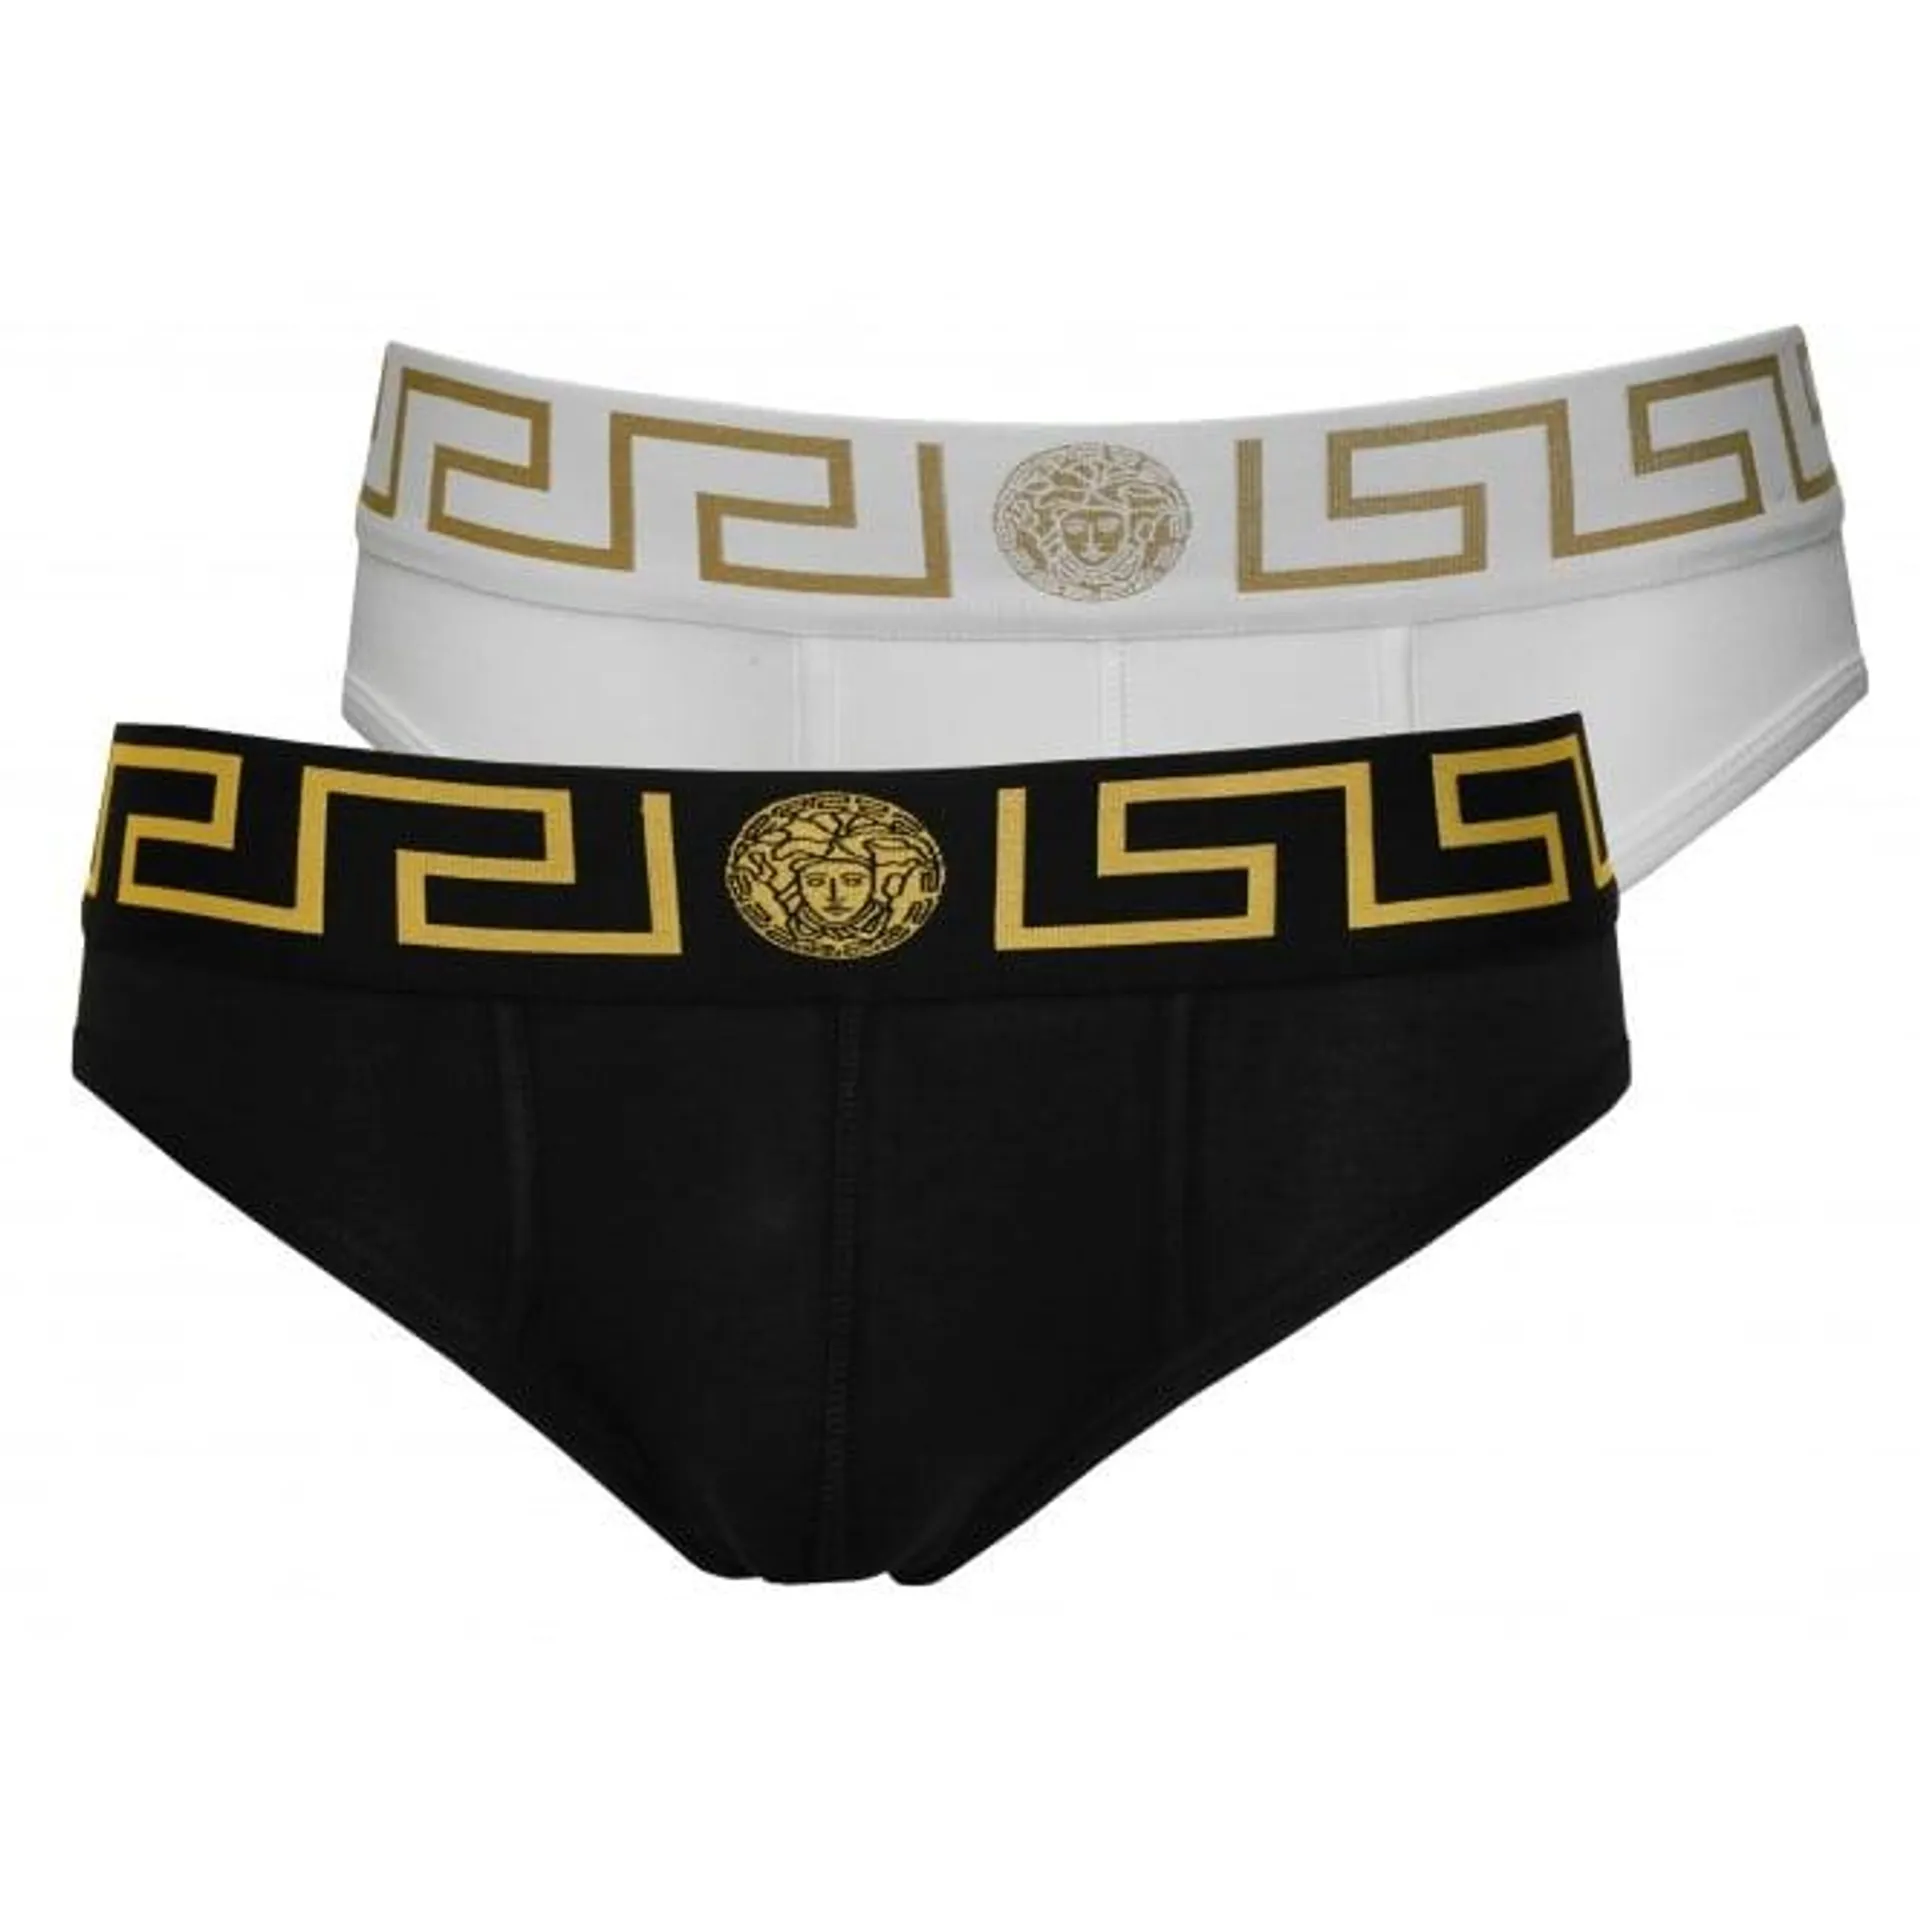 2-Pack Iconic Low-Rise Briefs, Black/White/gold